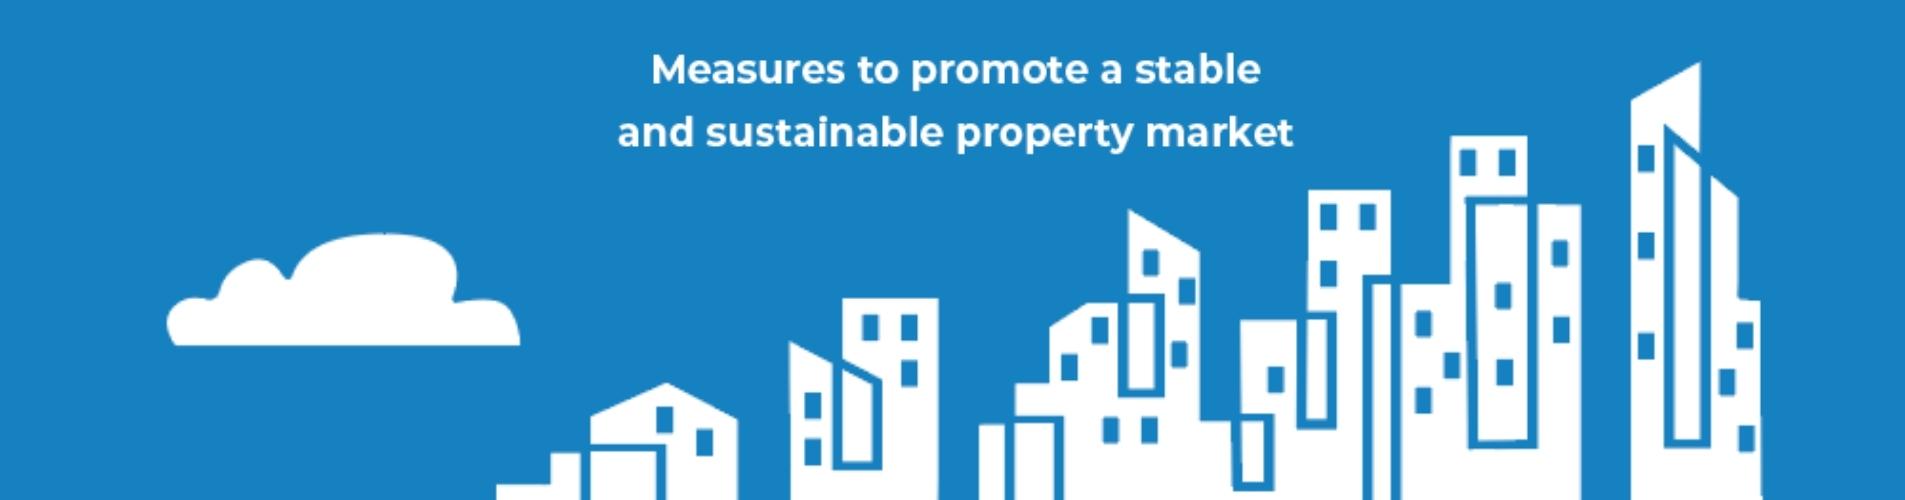 Measures to promote a stable and sustainable property market